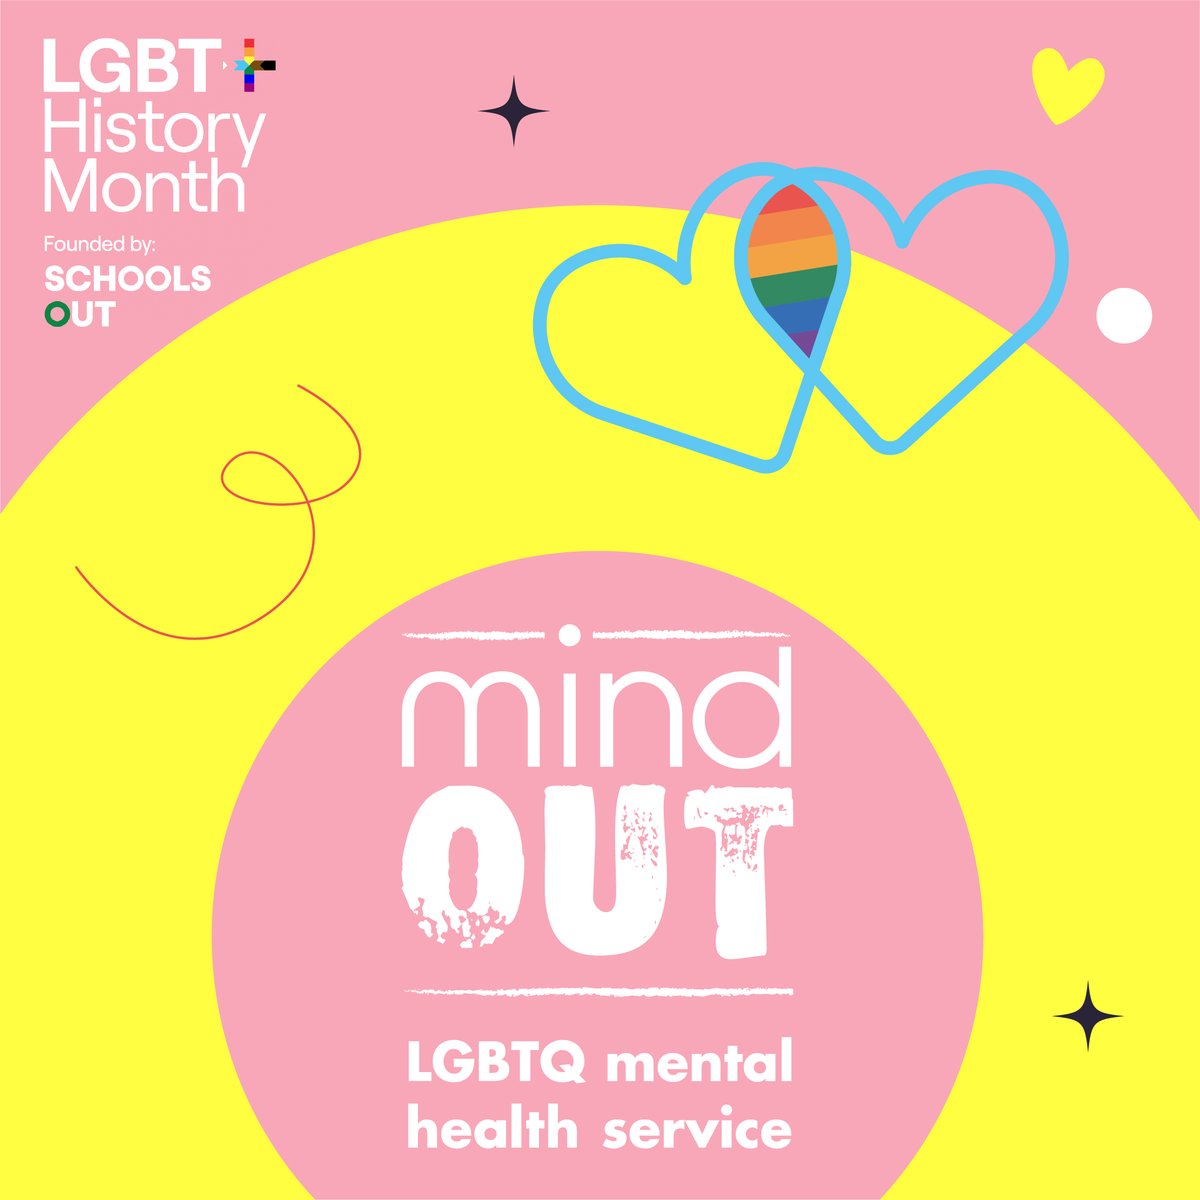 It's the final day of LGBTQ history month! MindOut is a mental health service run by and for lesbian, gay, bisexual, trans, and queer (LGBTQ) people. The charity works to make mental health a community concern. To find out more, please visit: mindout.org.uk